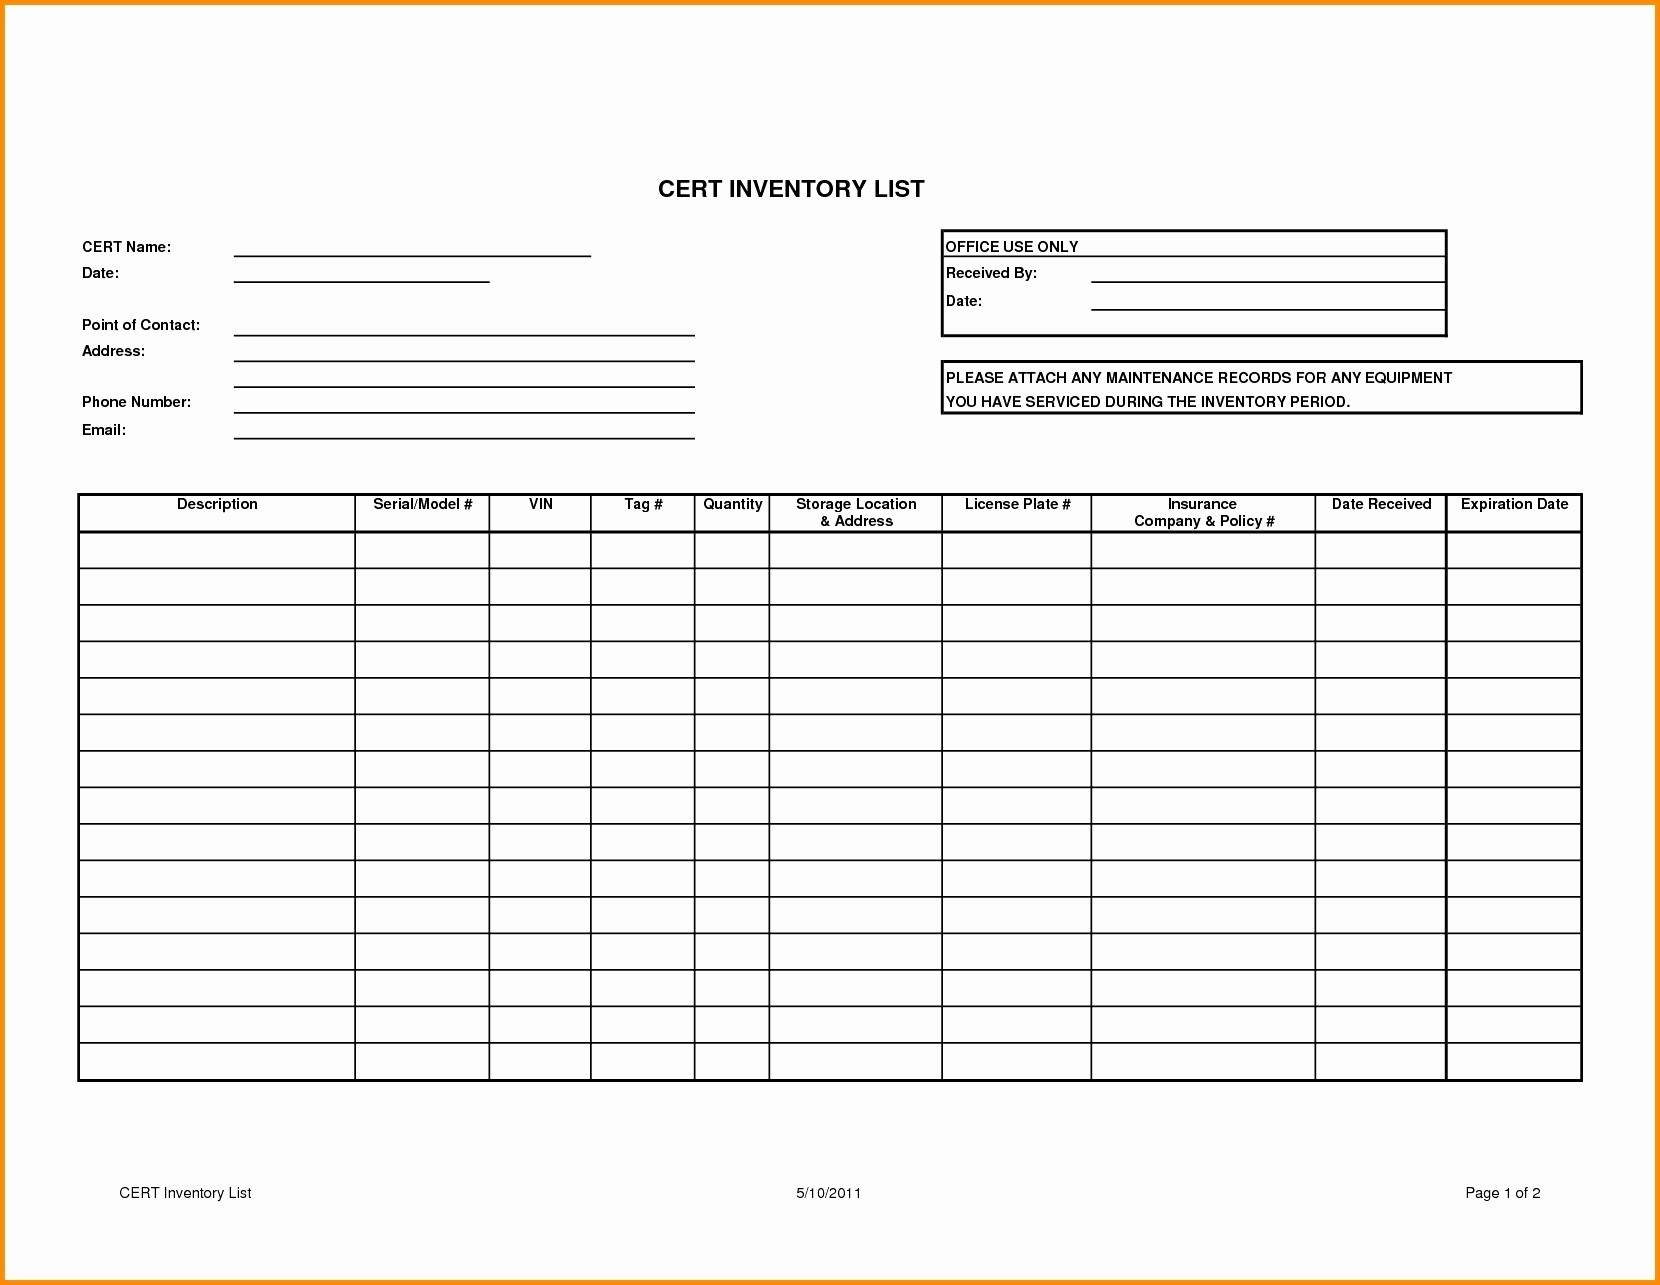 Cow Calf Inventory Spreadsheet On Free Microsoft Document Cattle Template